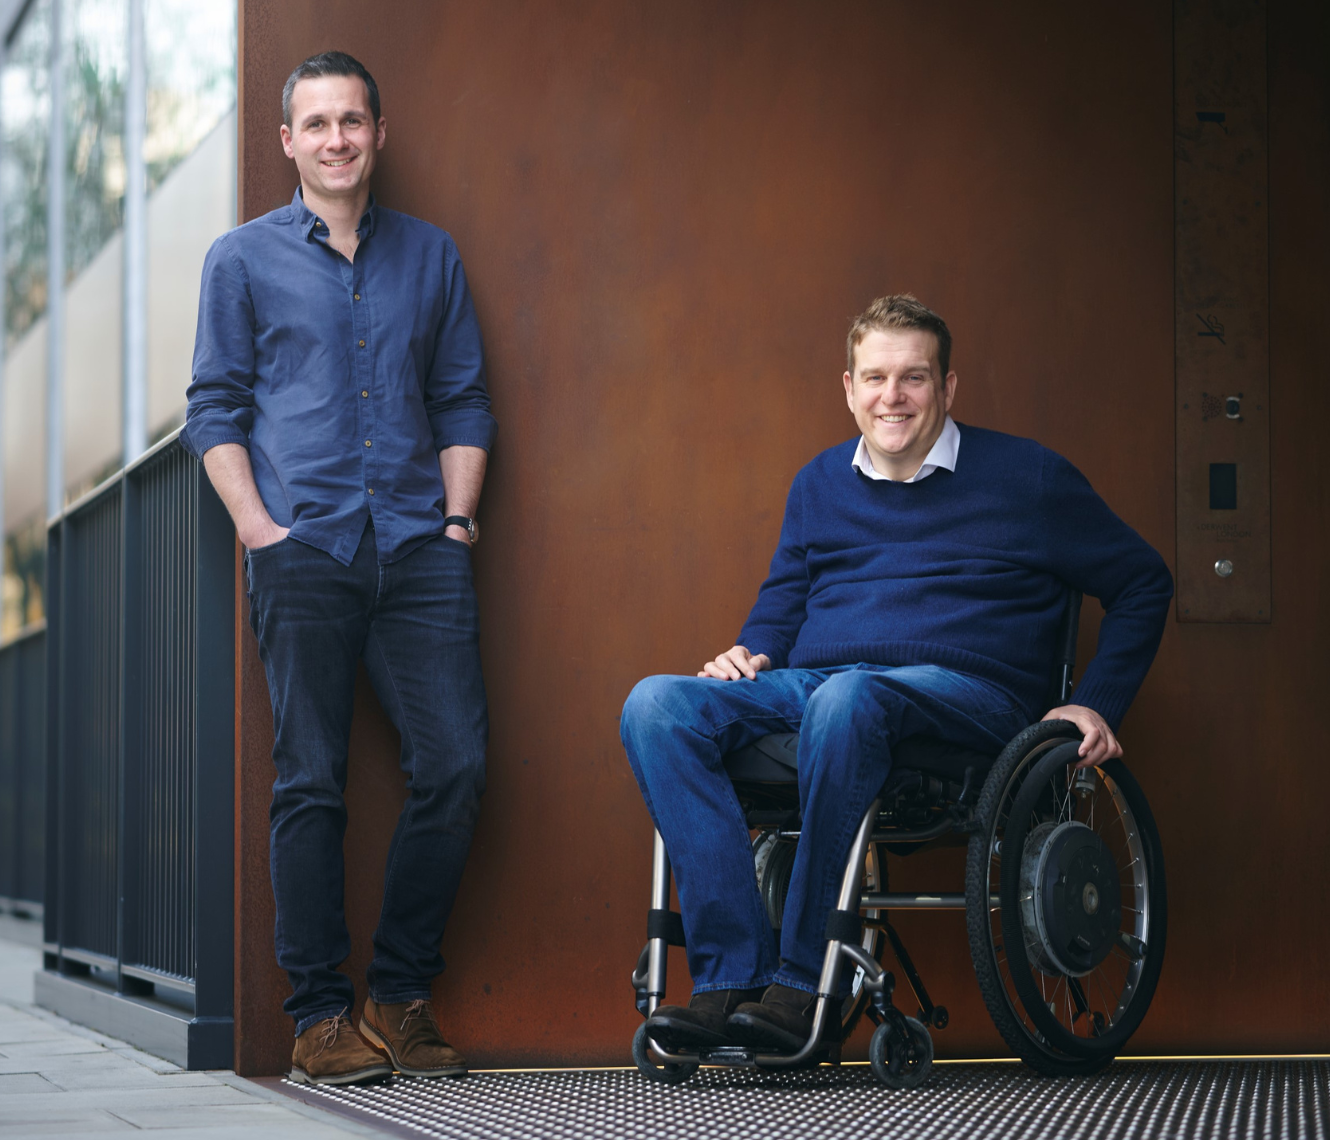 Ed Warner and James Taylor next to each other, outside a building. Ed standing, James sitting in his wheelchair